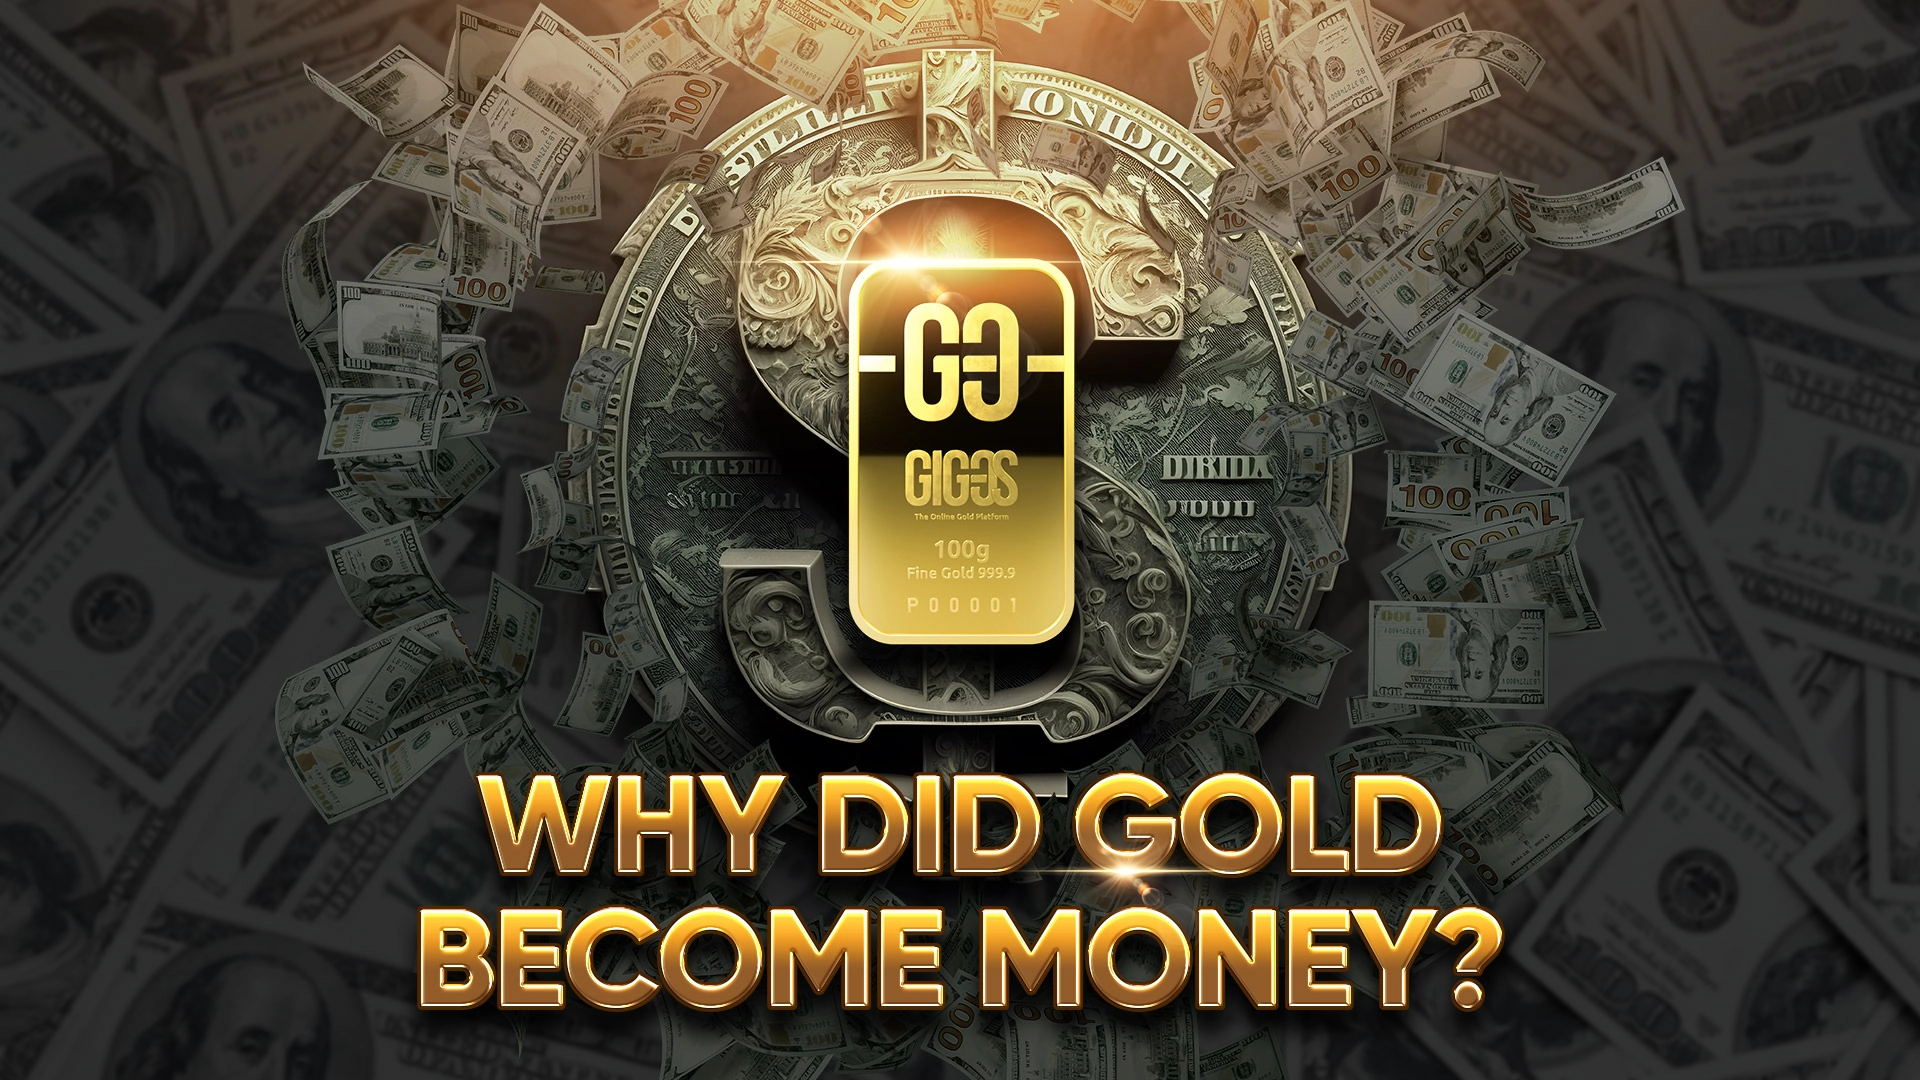 [VIDEO] Why did gold become money?
